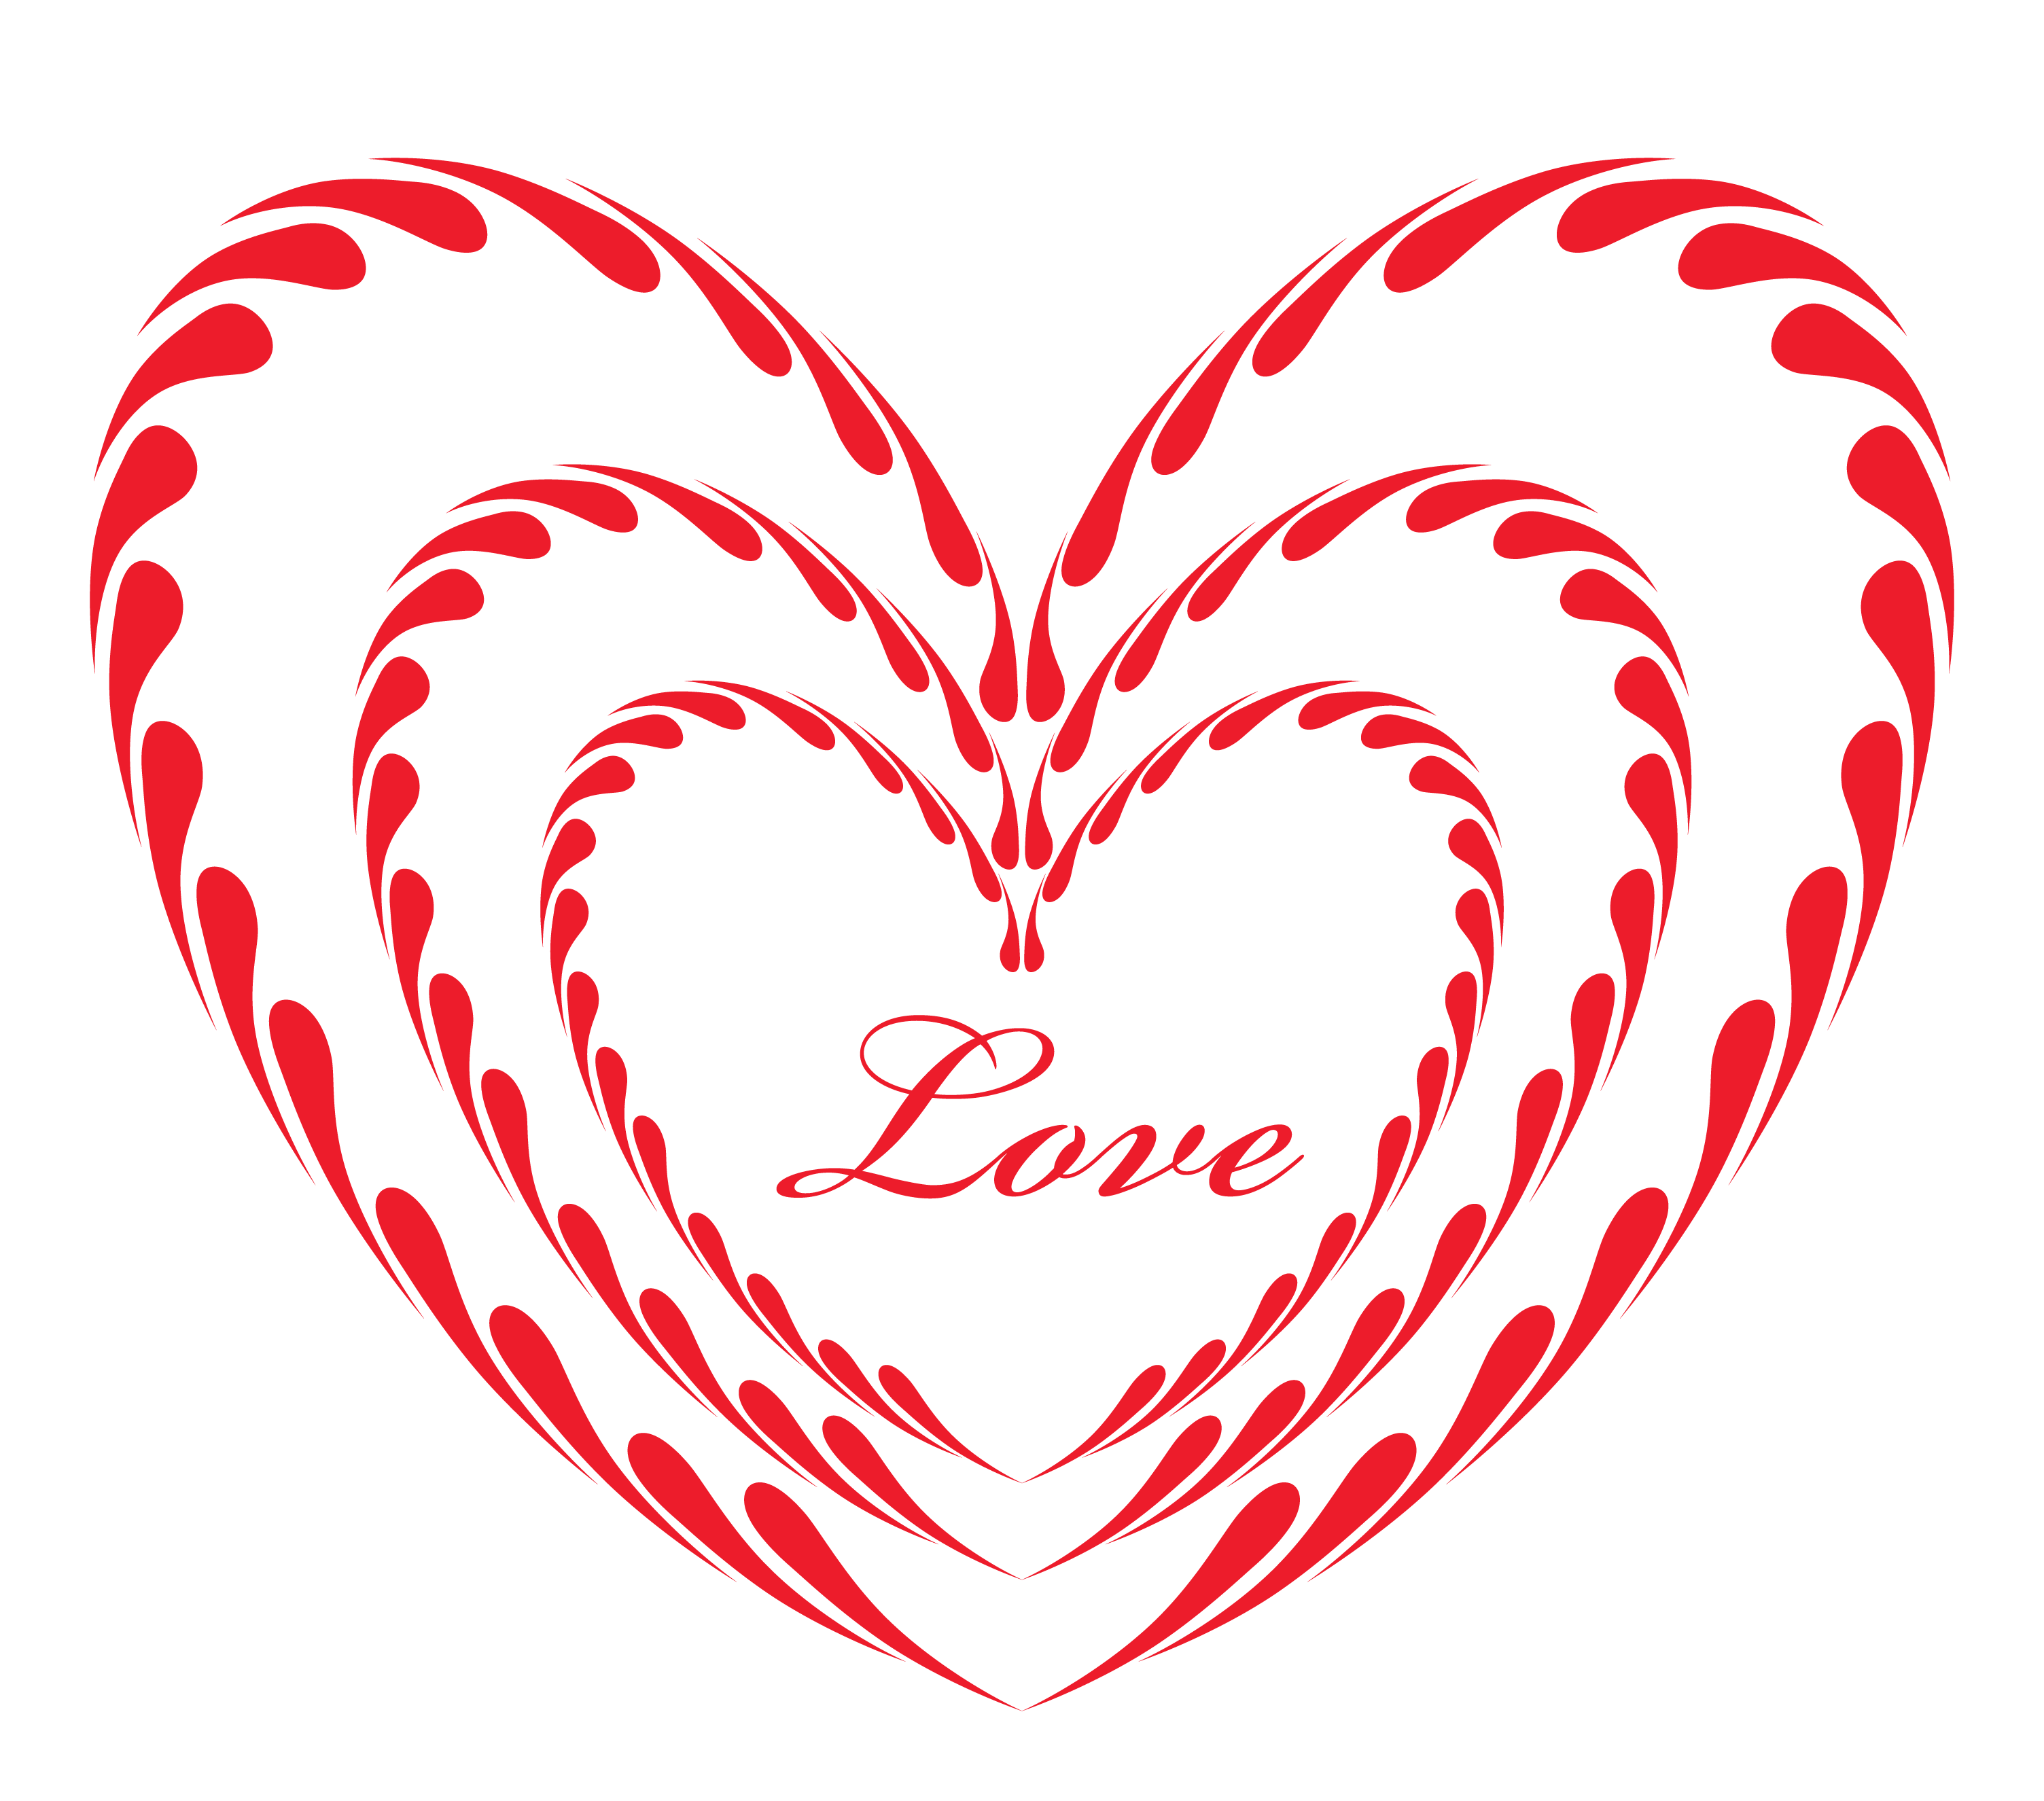 Red Heart Ornament Love PNG Clipart Picture | Gallery Yopriceville ...